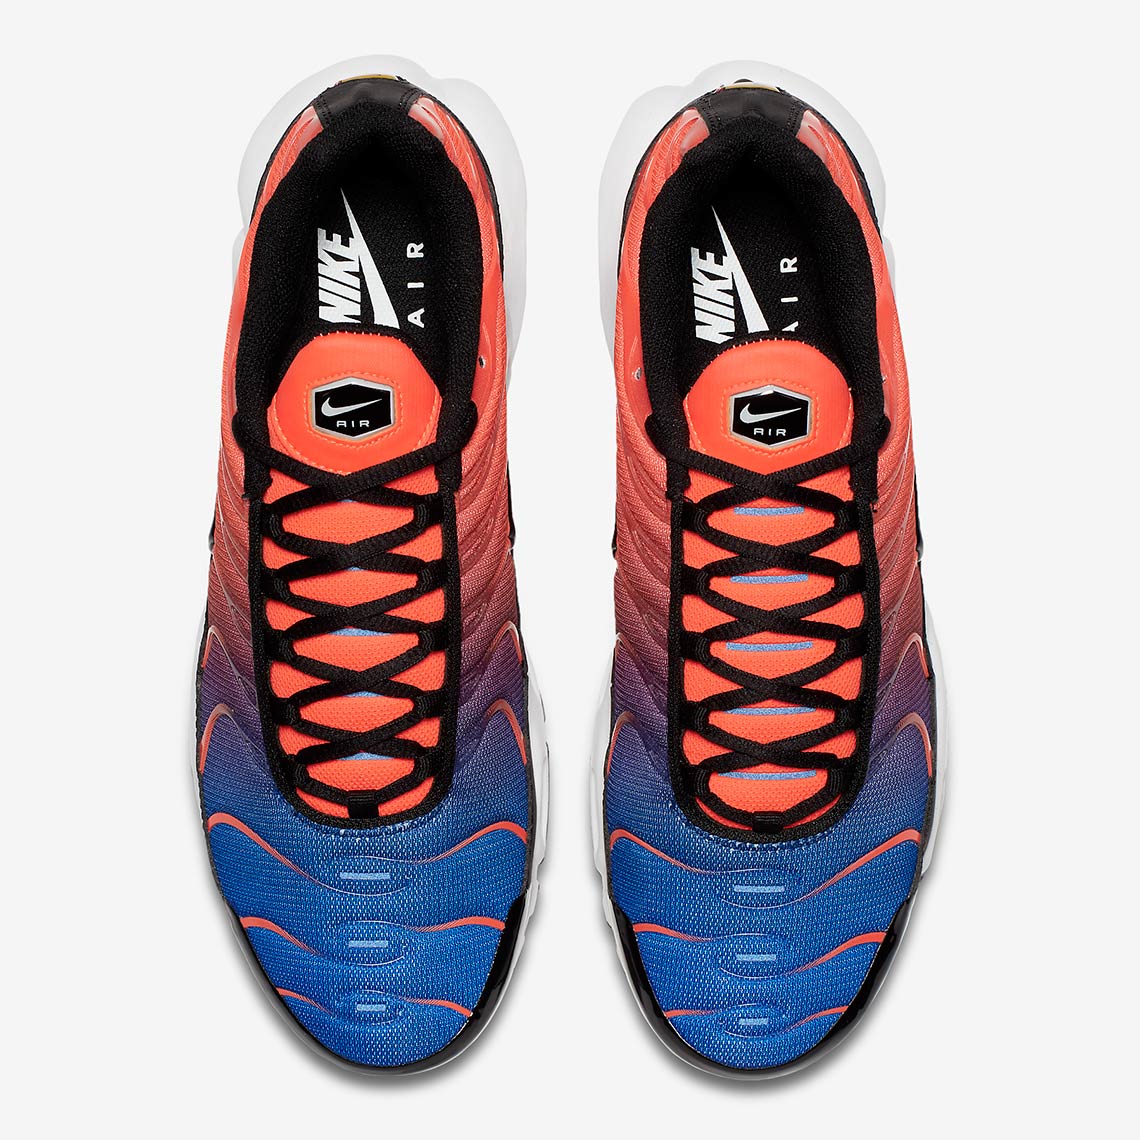 Nike Air Max Plus Gradient Pack Available Now 852630-407 852630-800 ...